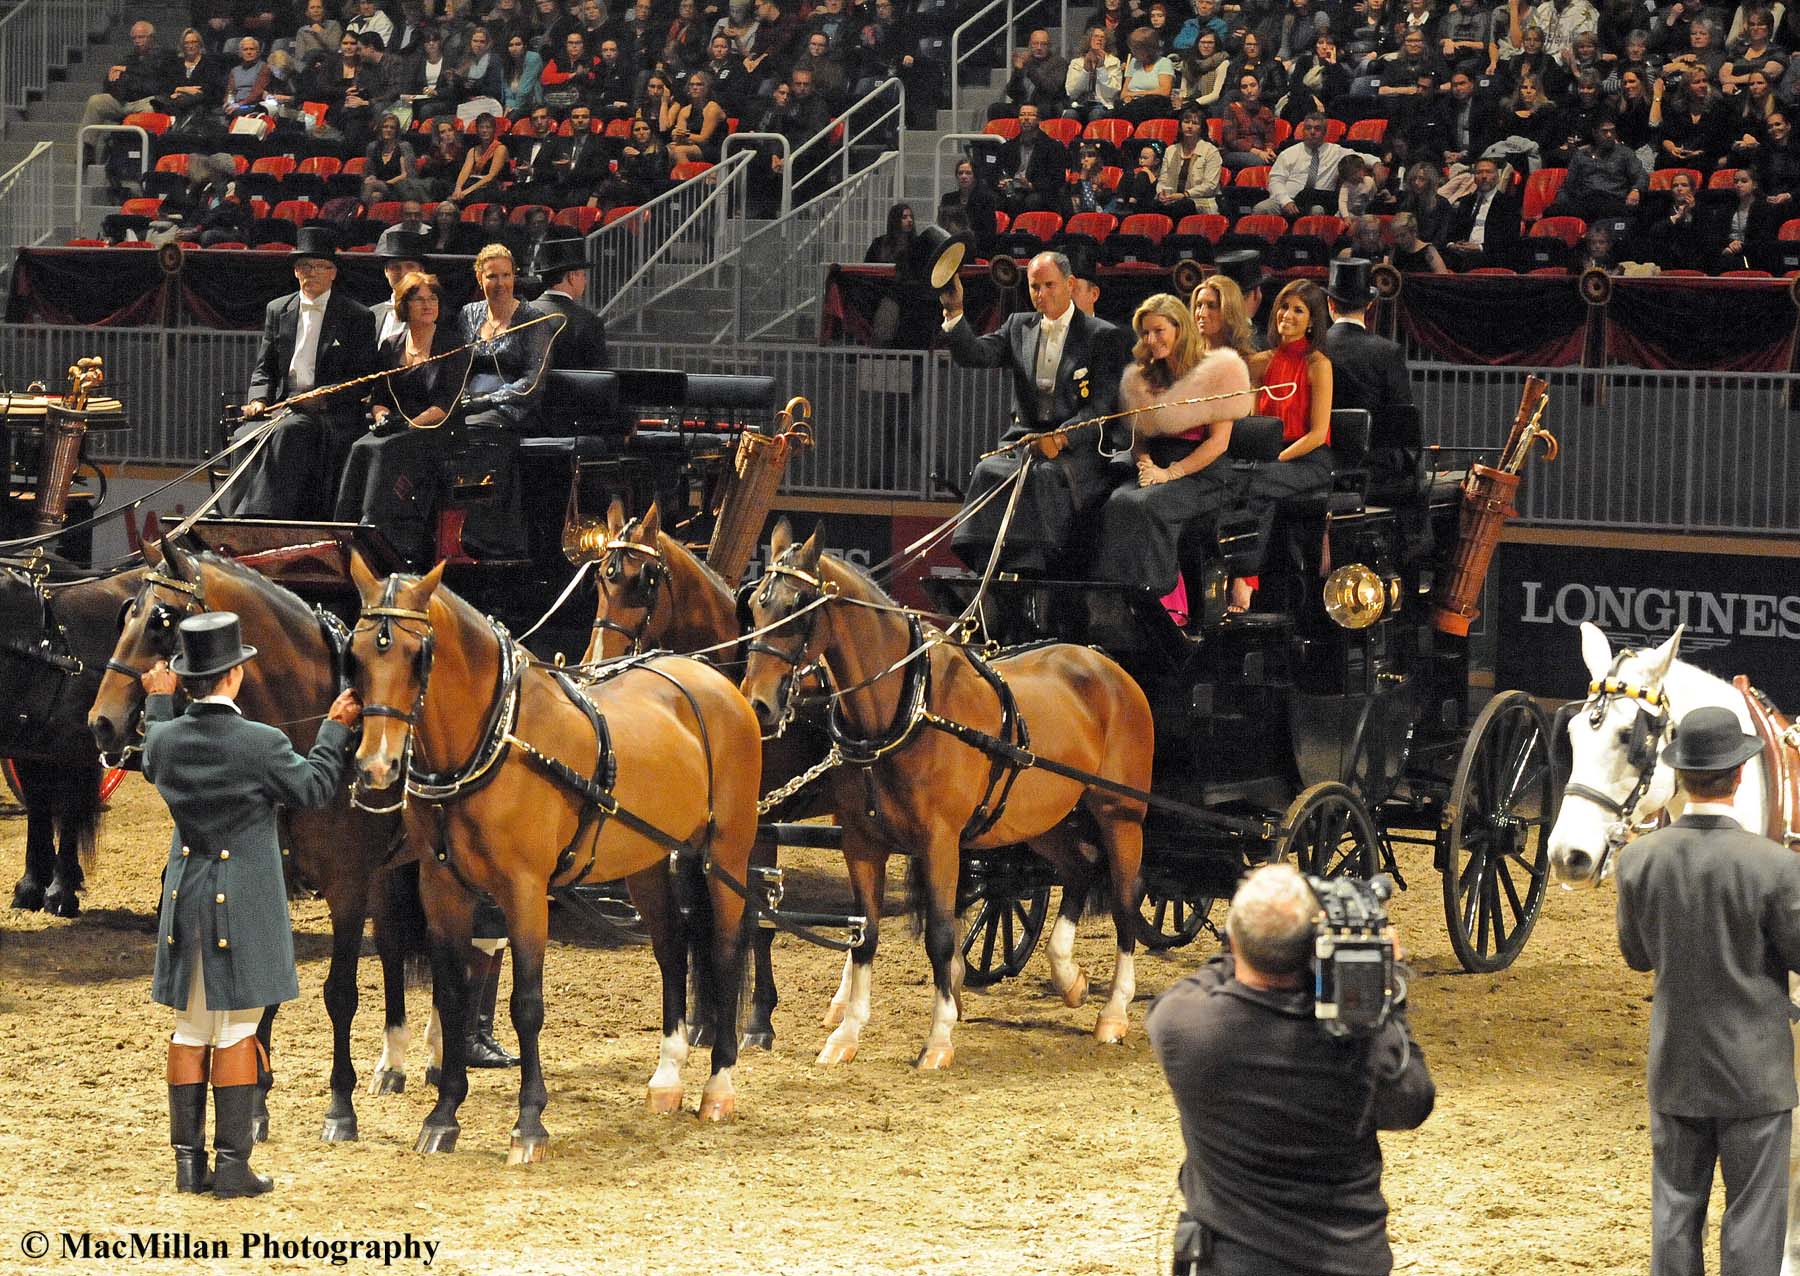 Photo 28 - The antique coach and team of Dutch harness horses owned by Hillcroft Farm and James and Misdee Miller of Paris, Kentucky, won the Green Meadow Four-In-Hand Appointments class on the final Friday of the Royal. Photo by Kim MacMillan/MacMillan 